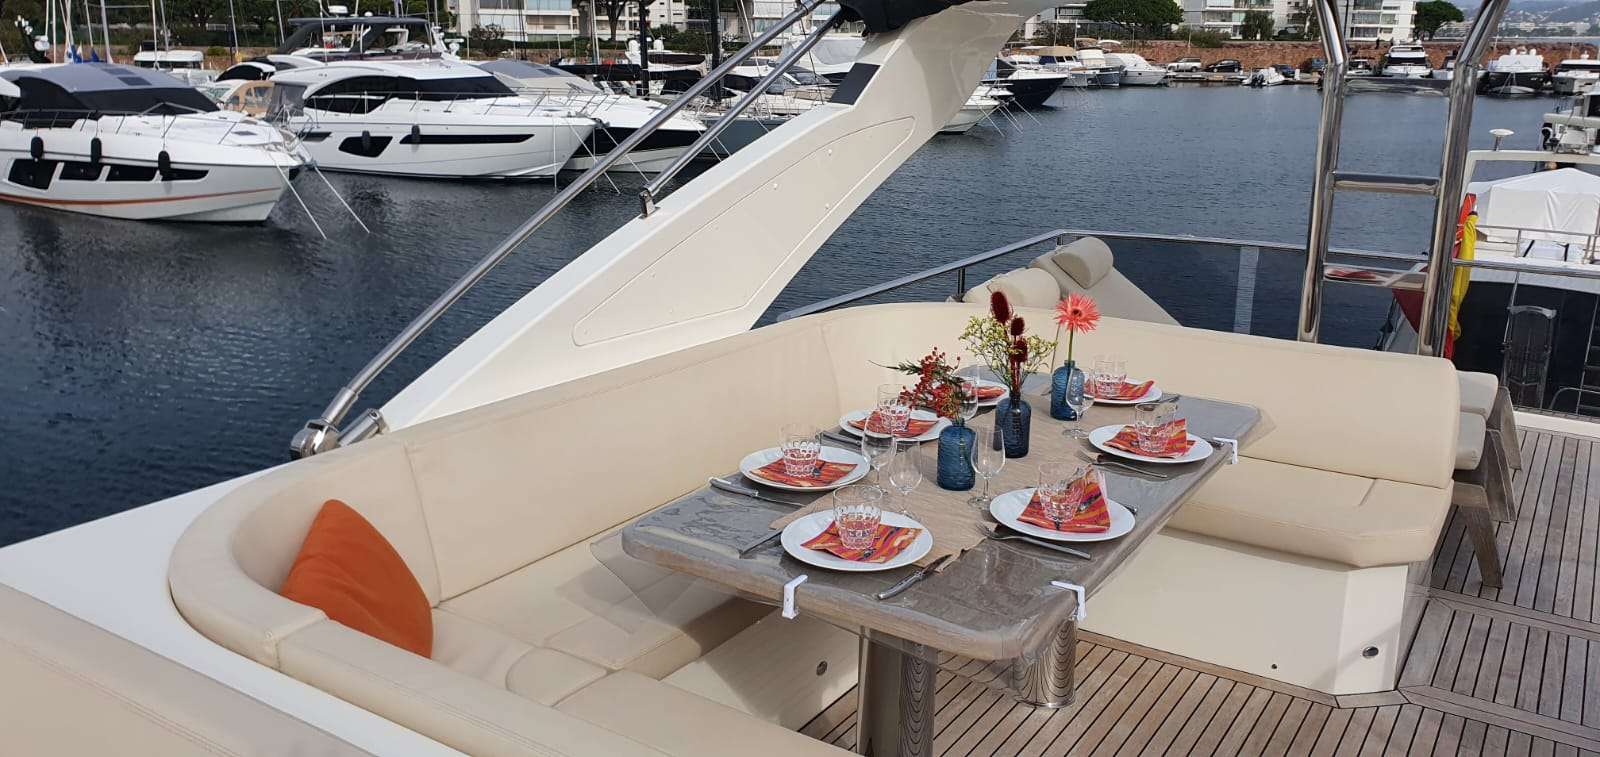 ABSOLUTE - Motor Boat Charter France & Boat hire in Fr. Riviera, Corsica & Sardinia 3